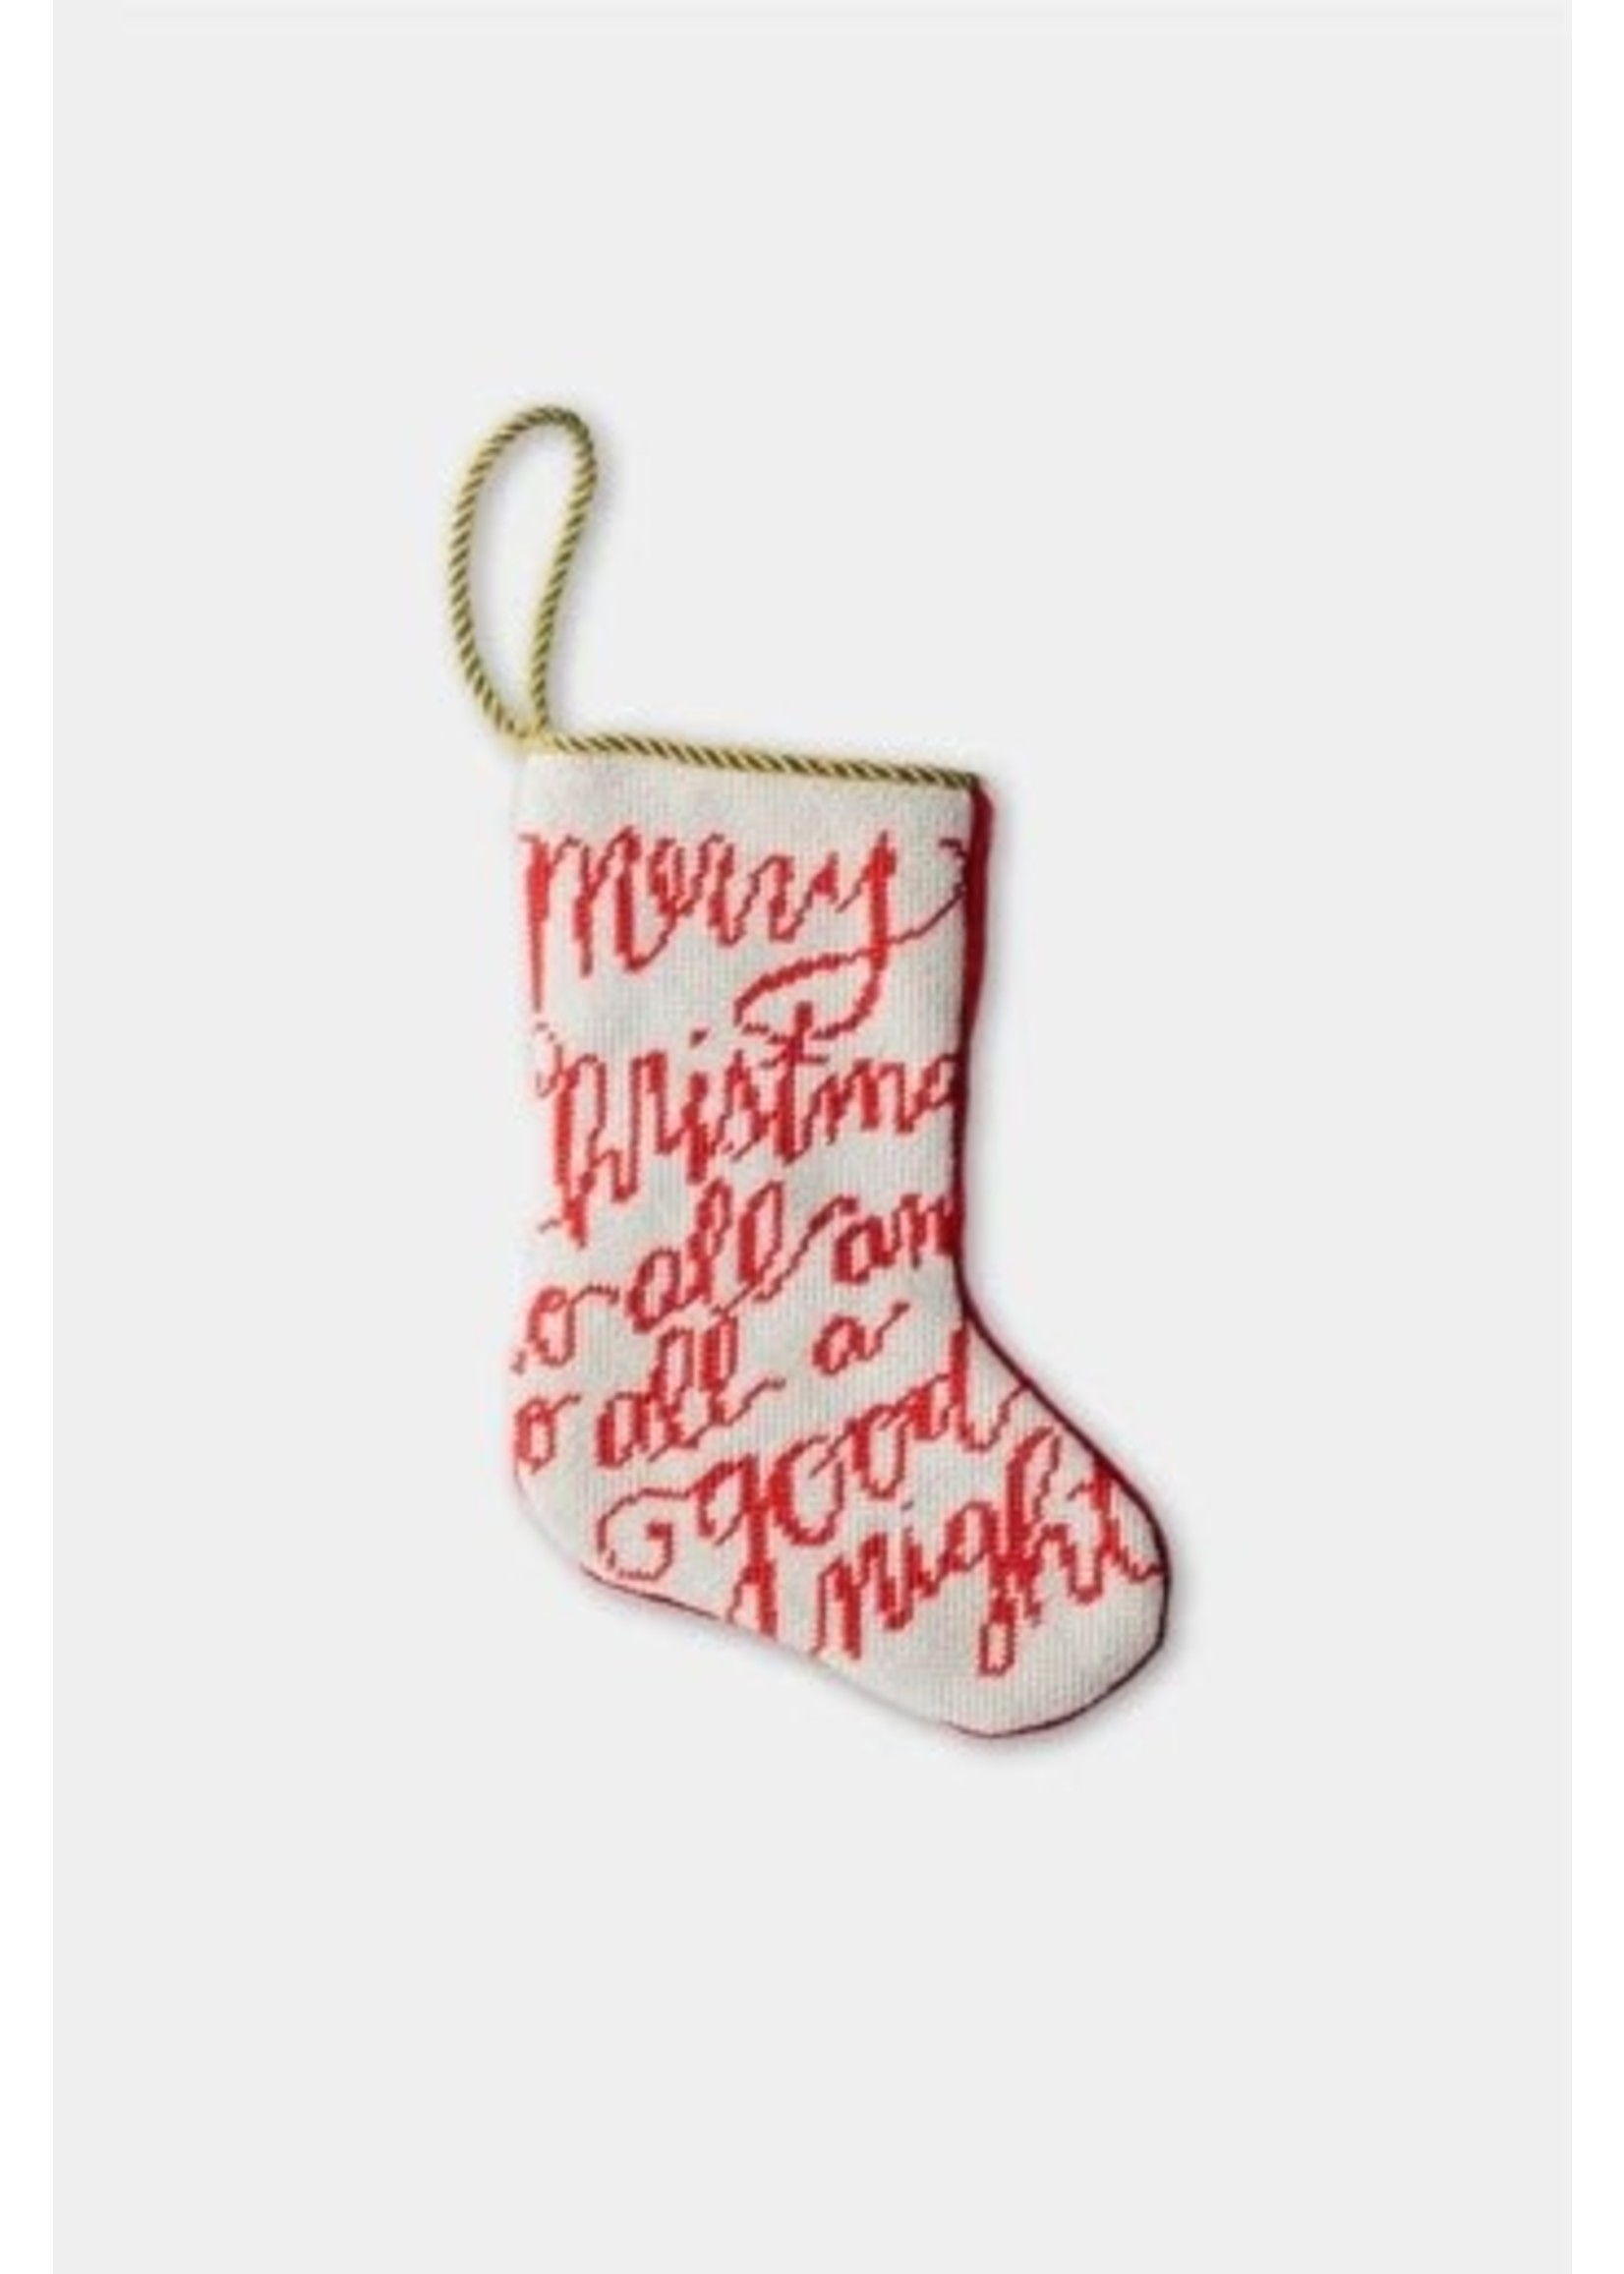 Bauble Stockings Bauble Stocking - Merry Christmas to All